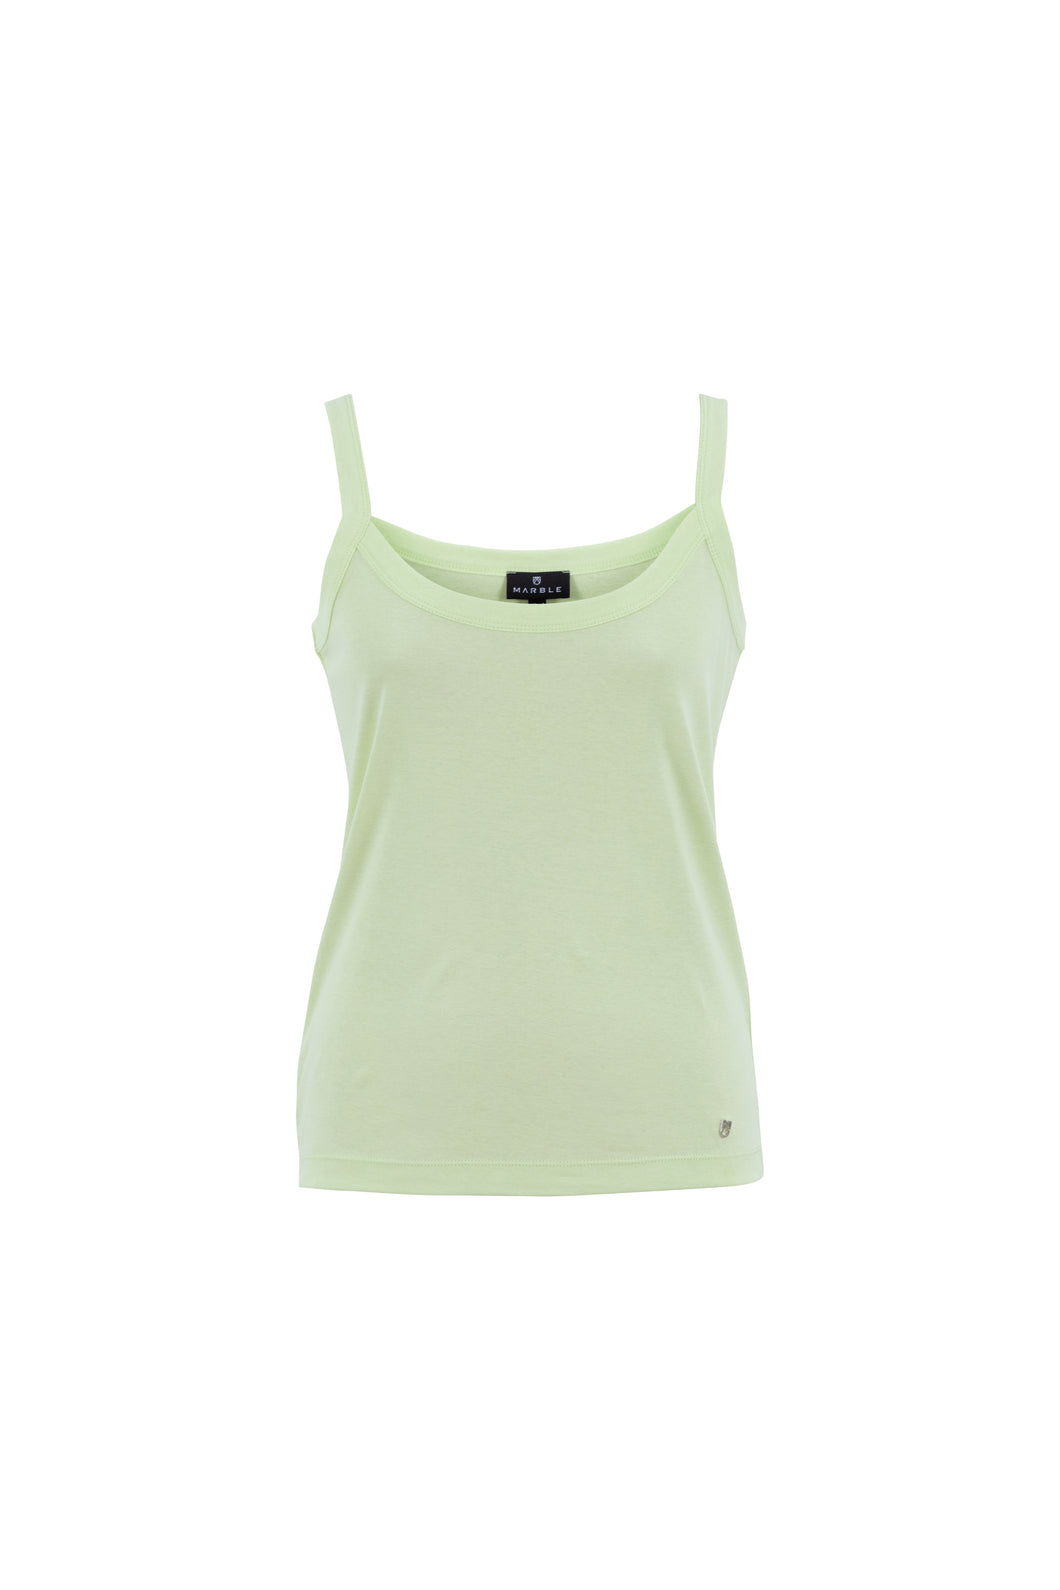 Marble - Camisole  - 2534